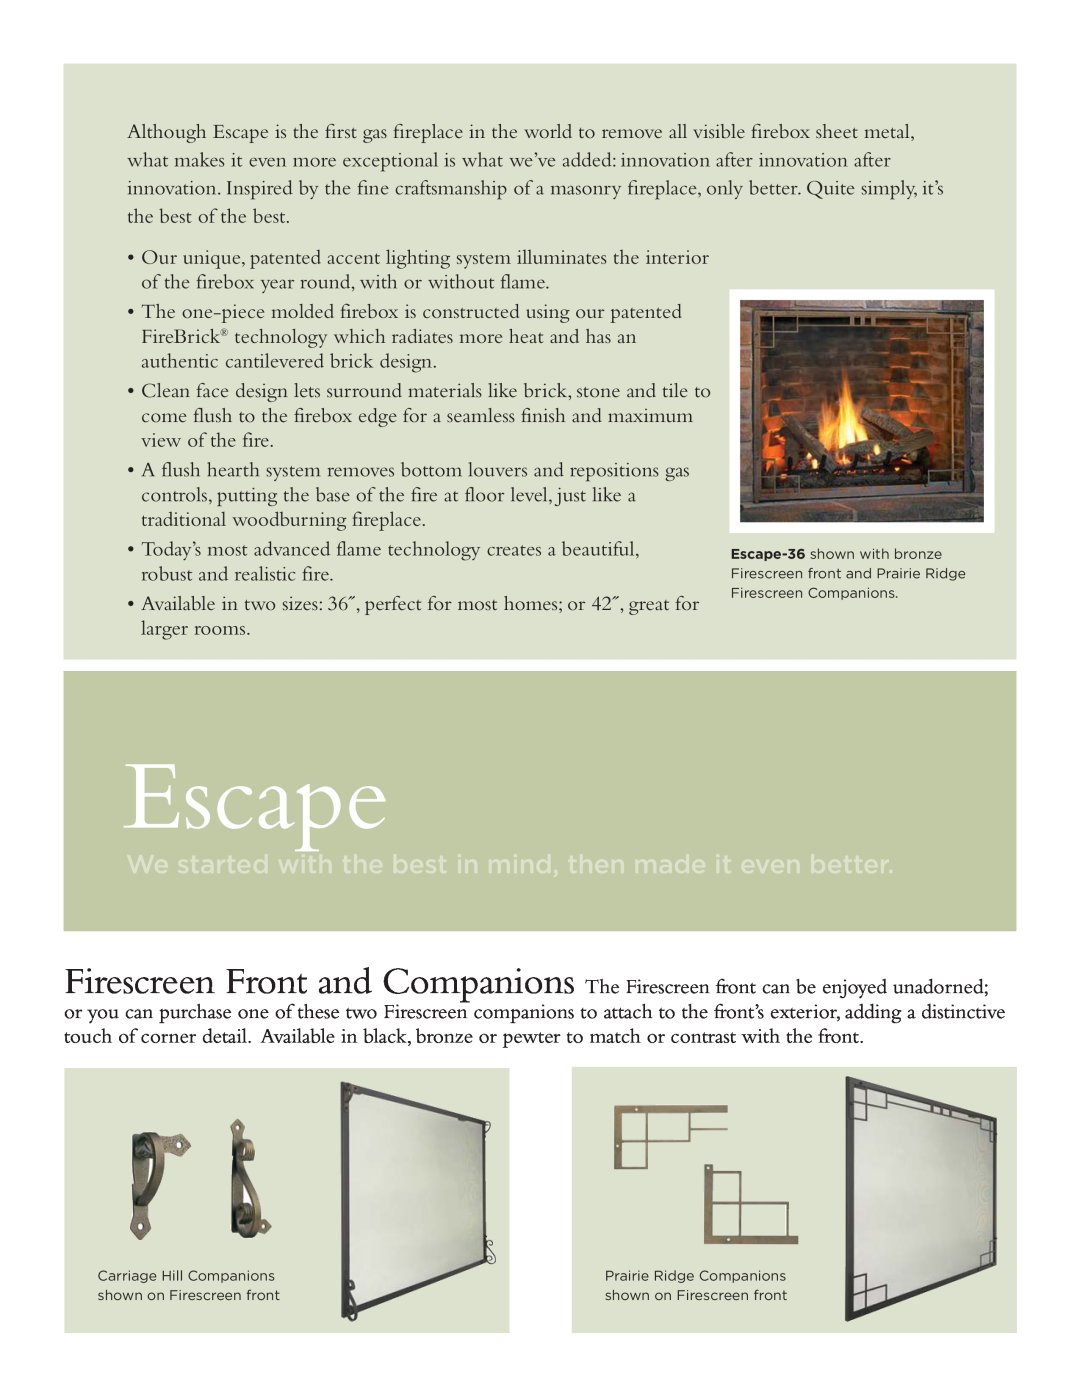 Hearth and Home Technologies ESCAPE-36DV manual Escape, We started with the best in mind, then made it even better 